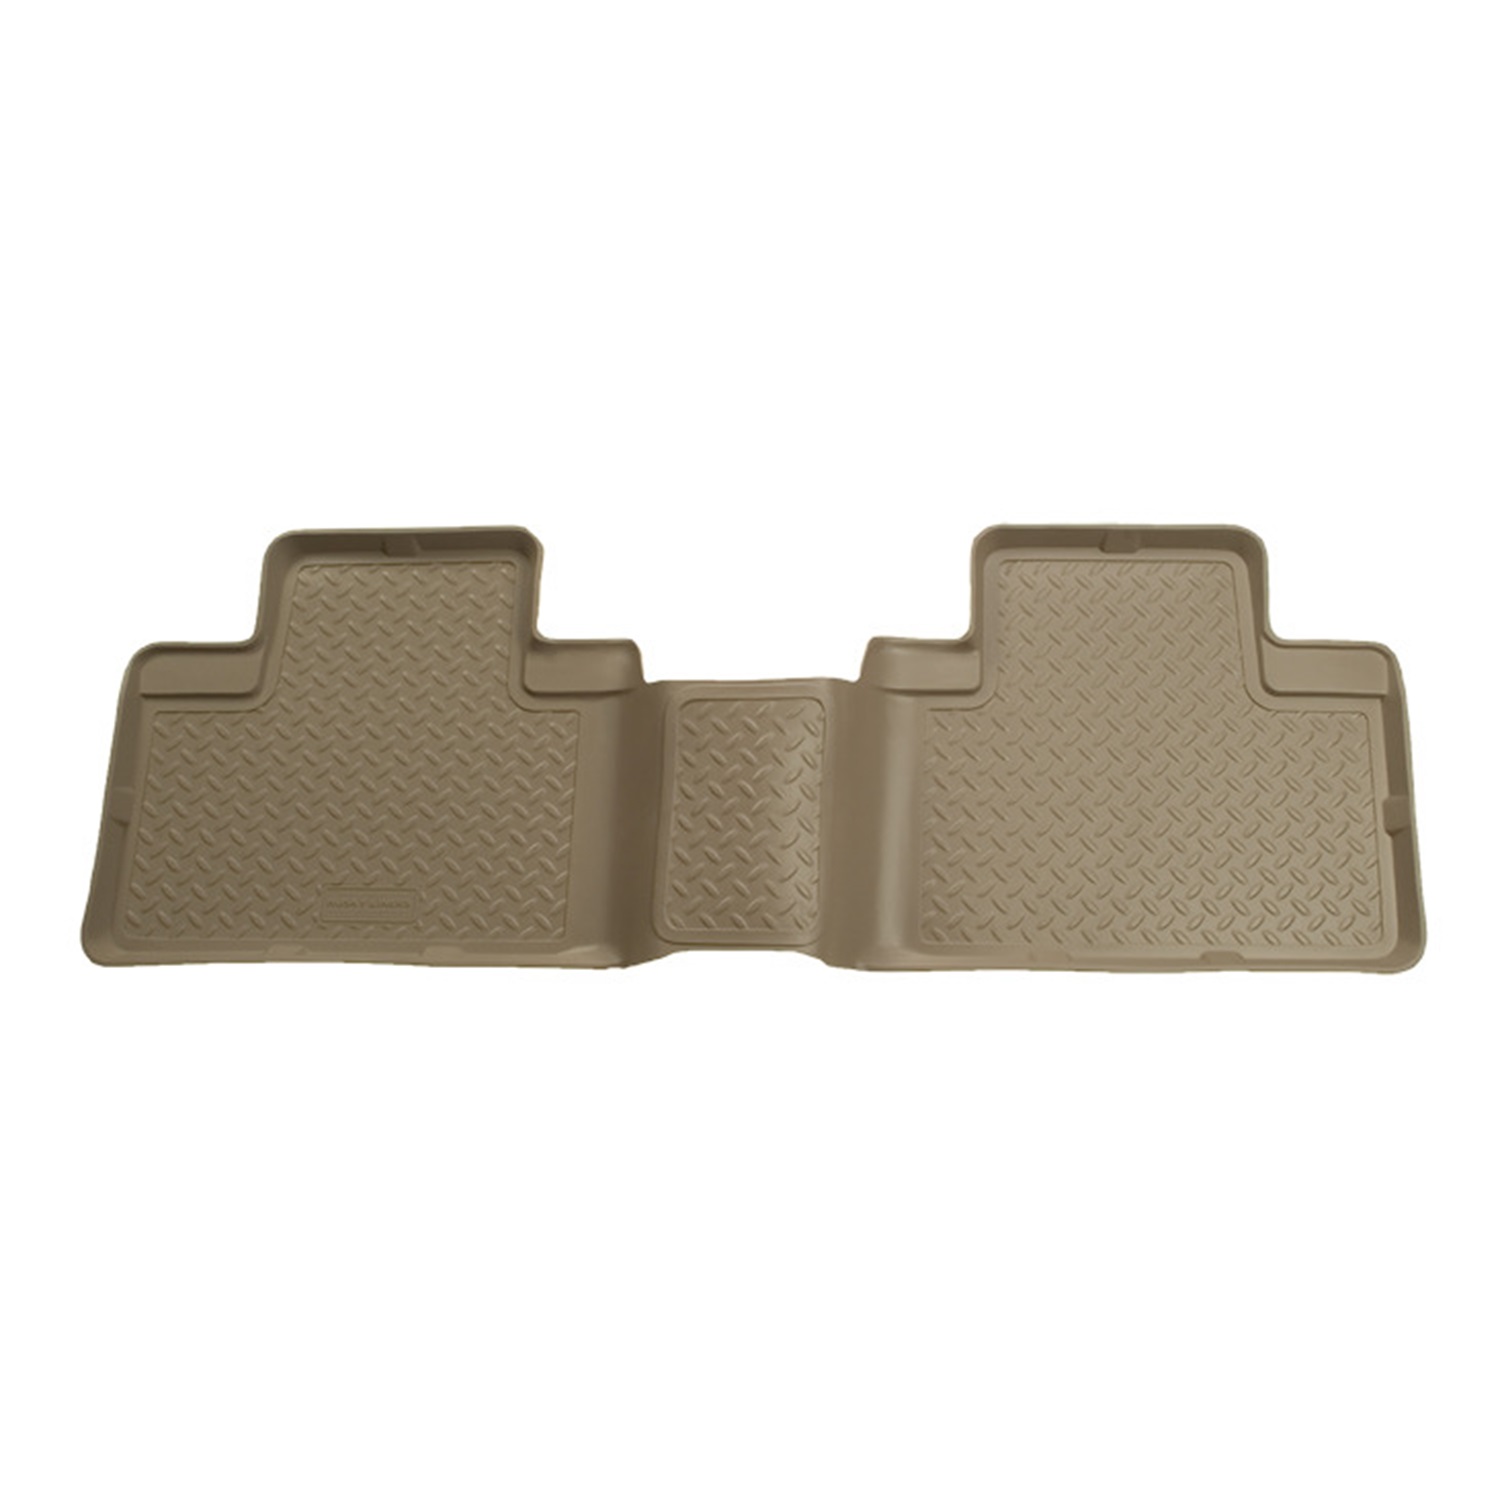 Husky Liners Husky Liners 73543 Classic Style; Floor Liner Fits 07-14 Expedition Navigator